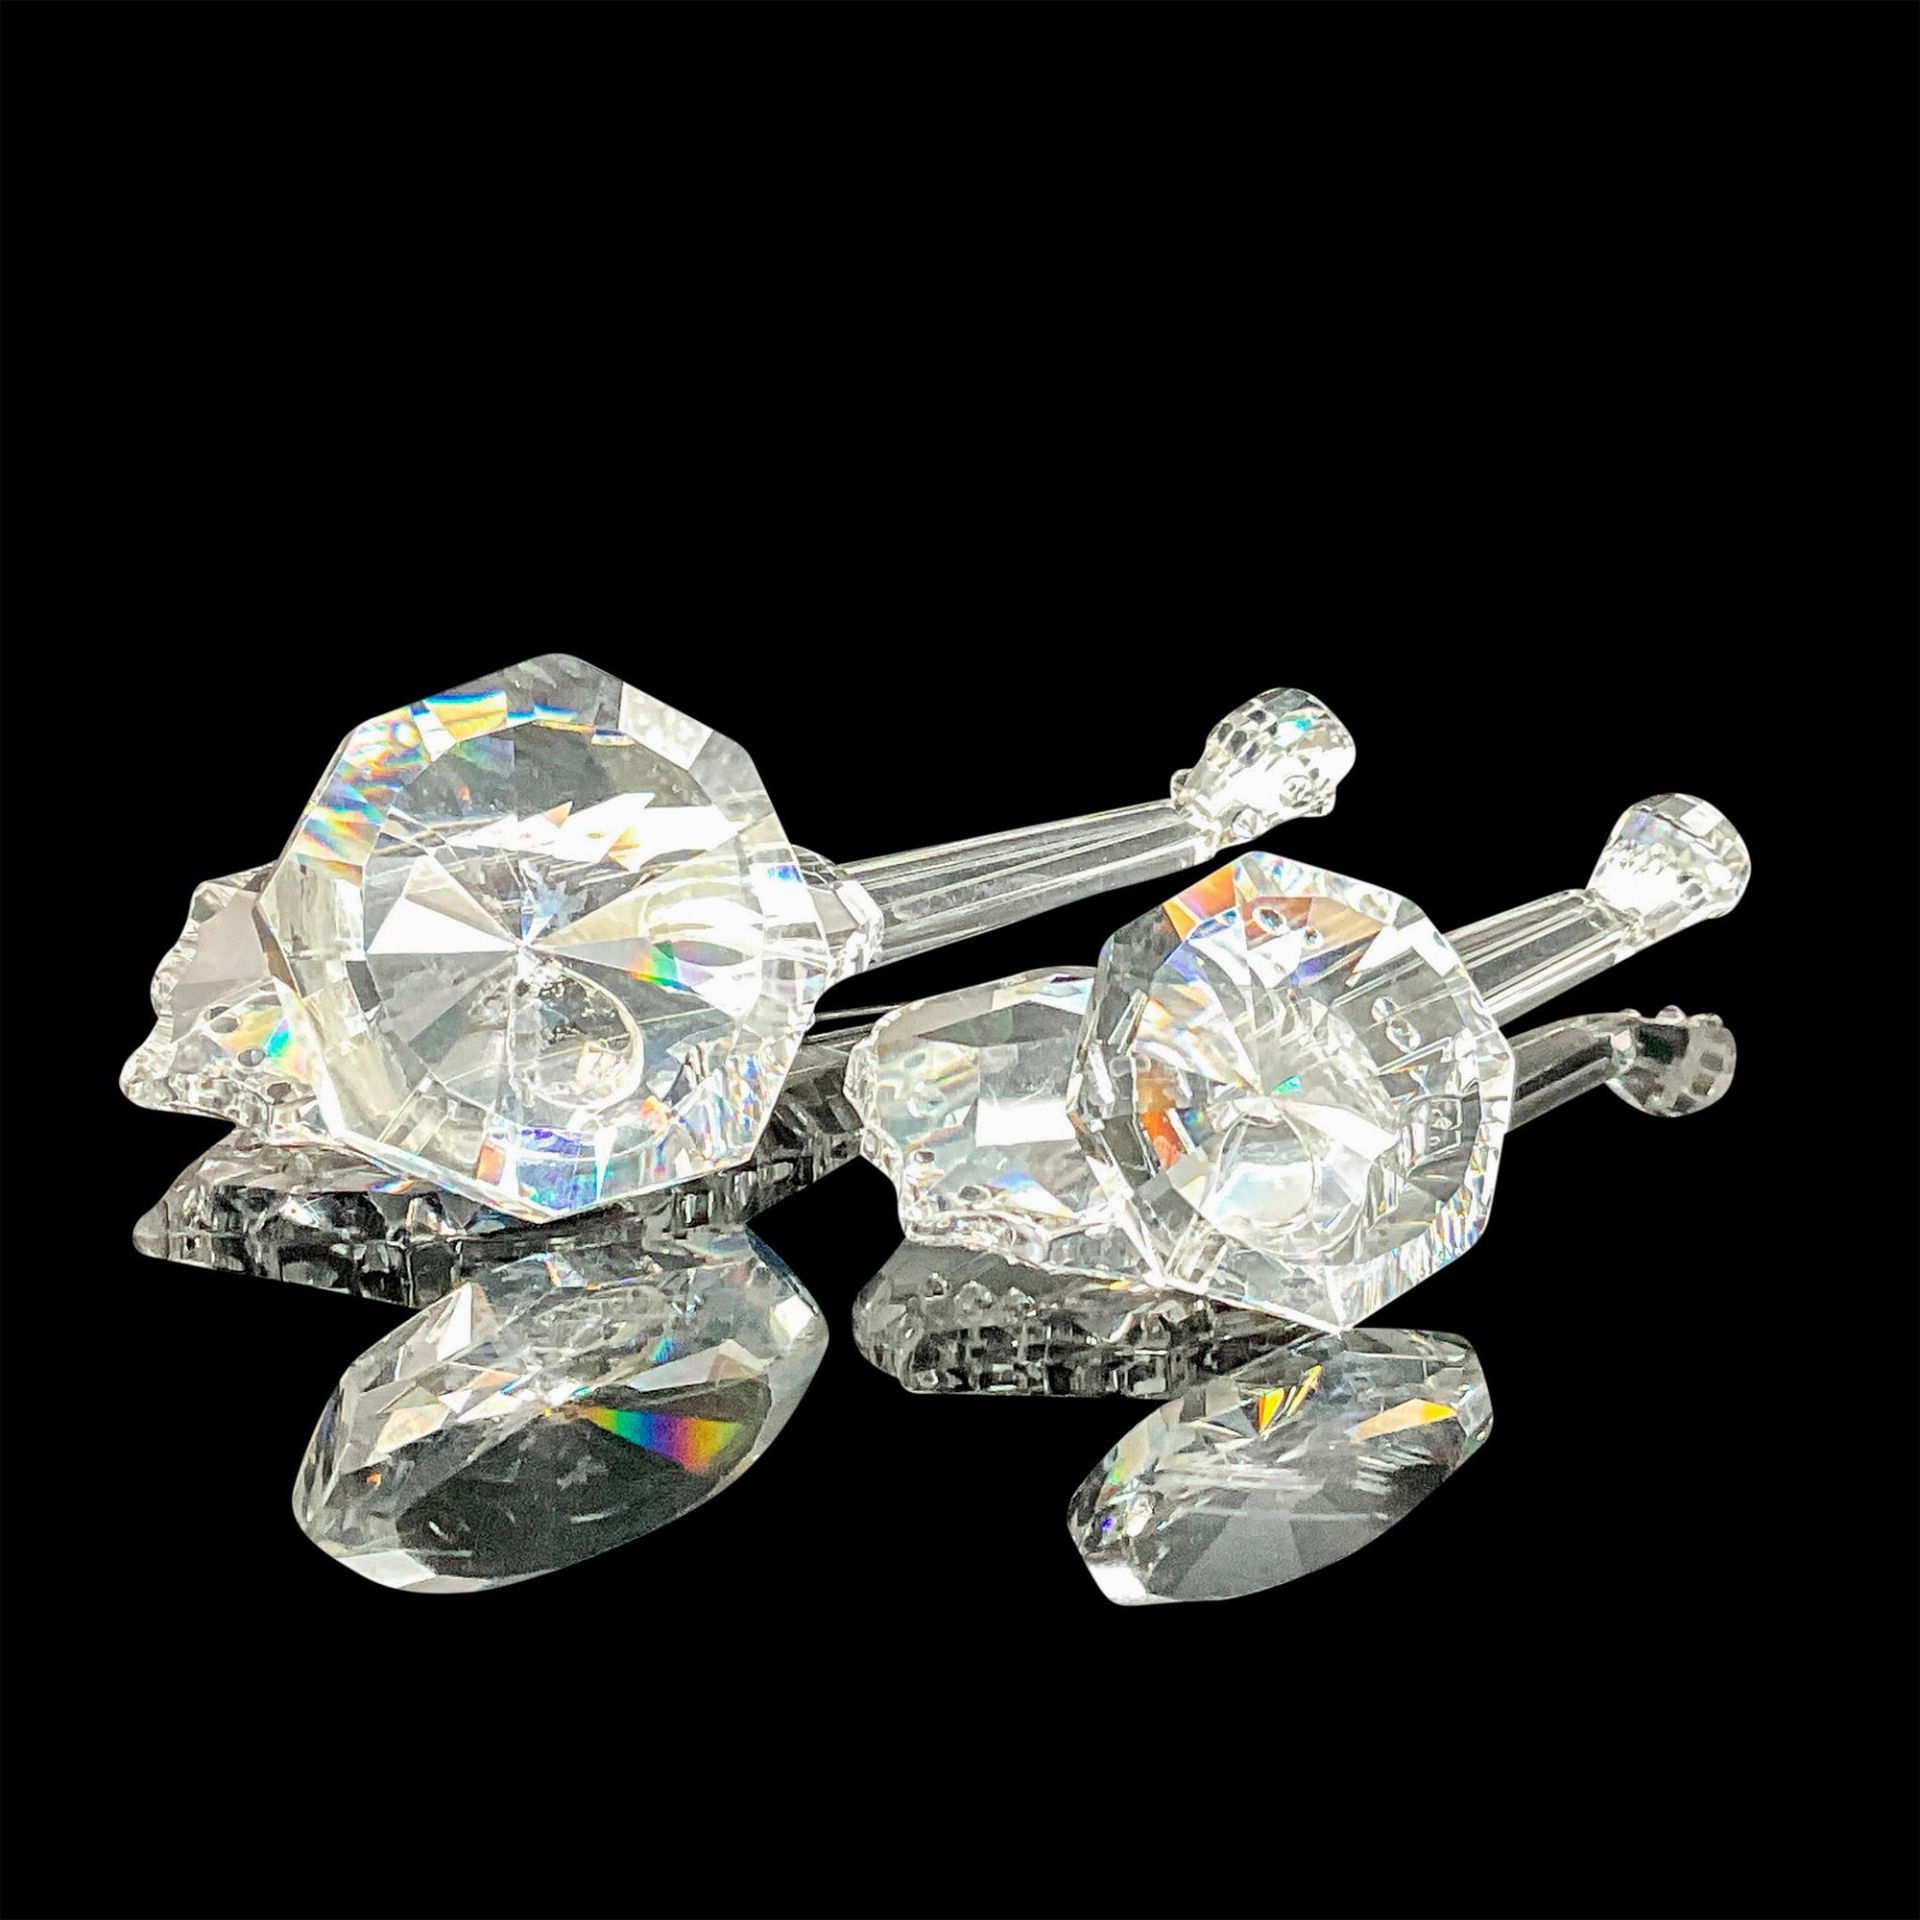 Pair of Asfour Crystal Figurines, Guitars - Image 3 of 3